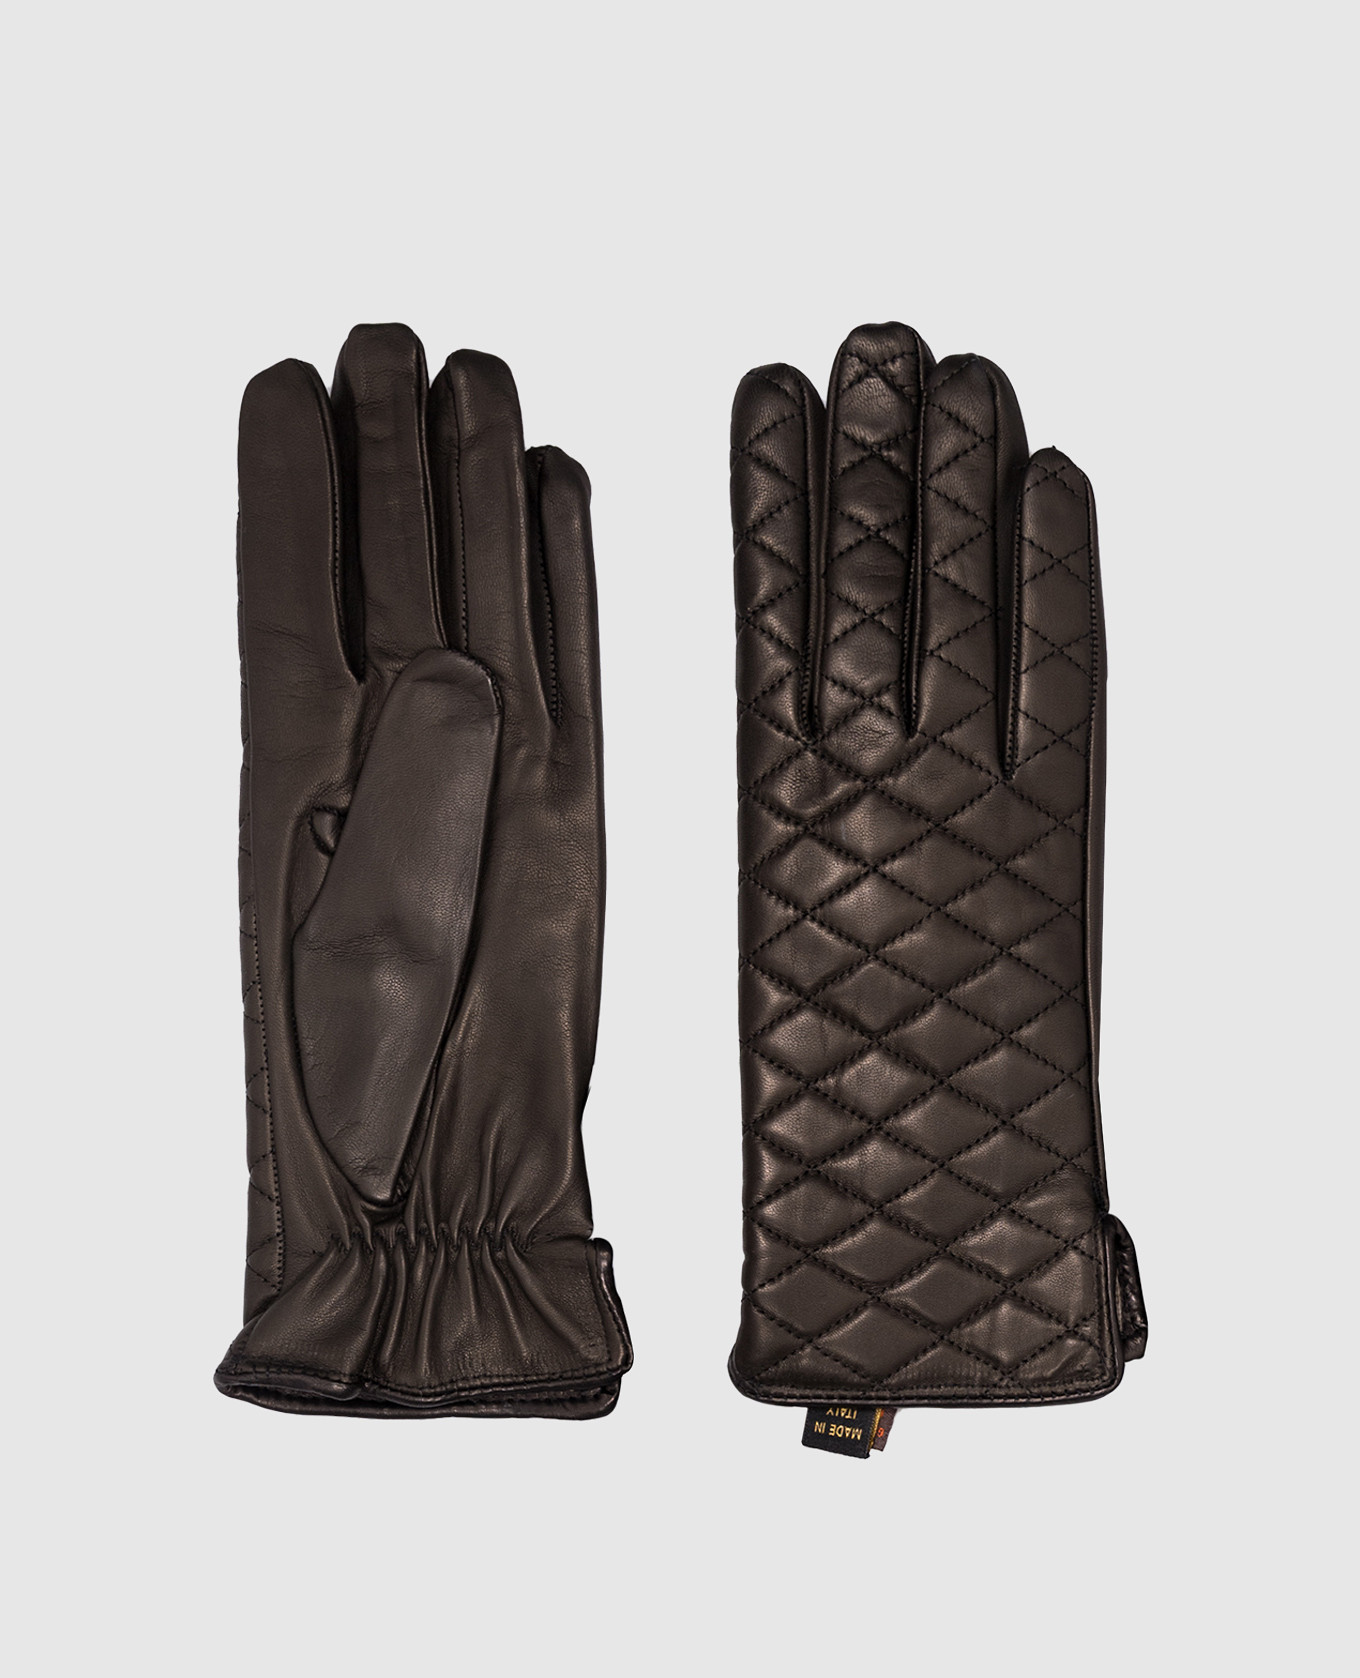 Black leather quilted gloves